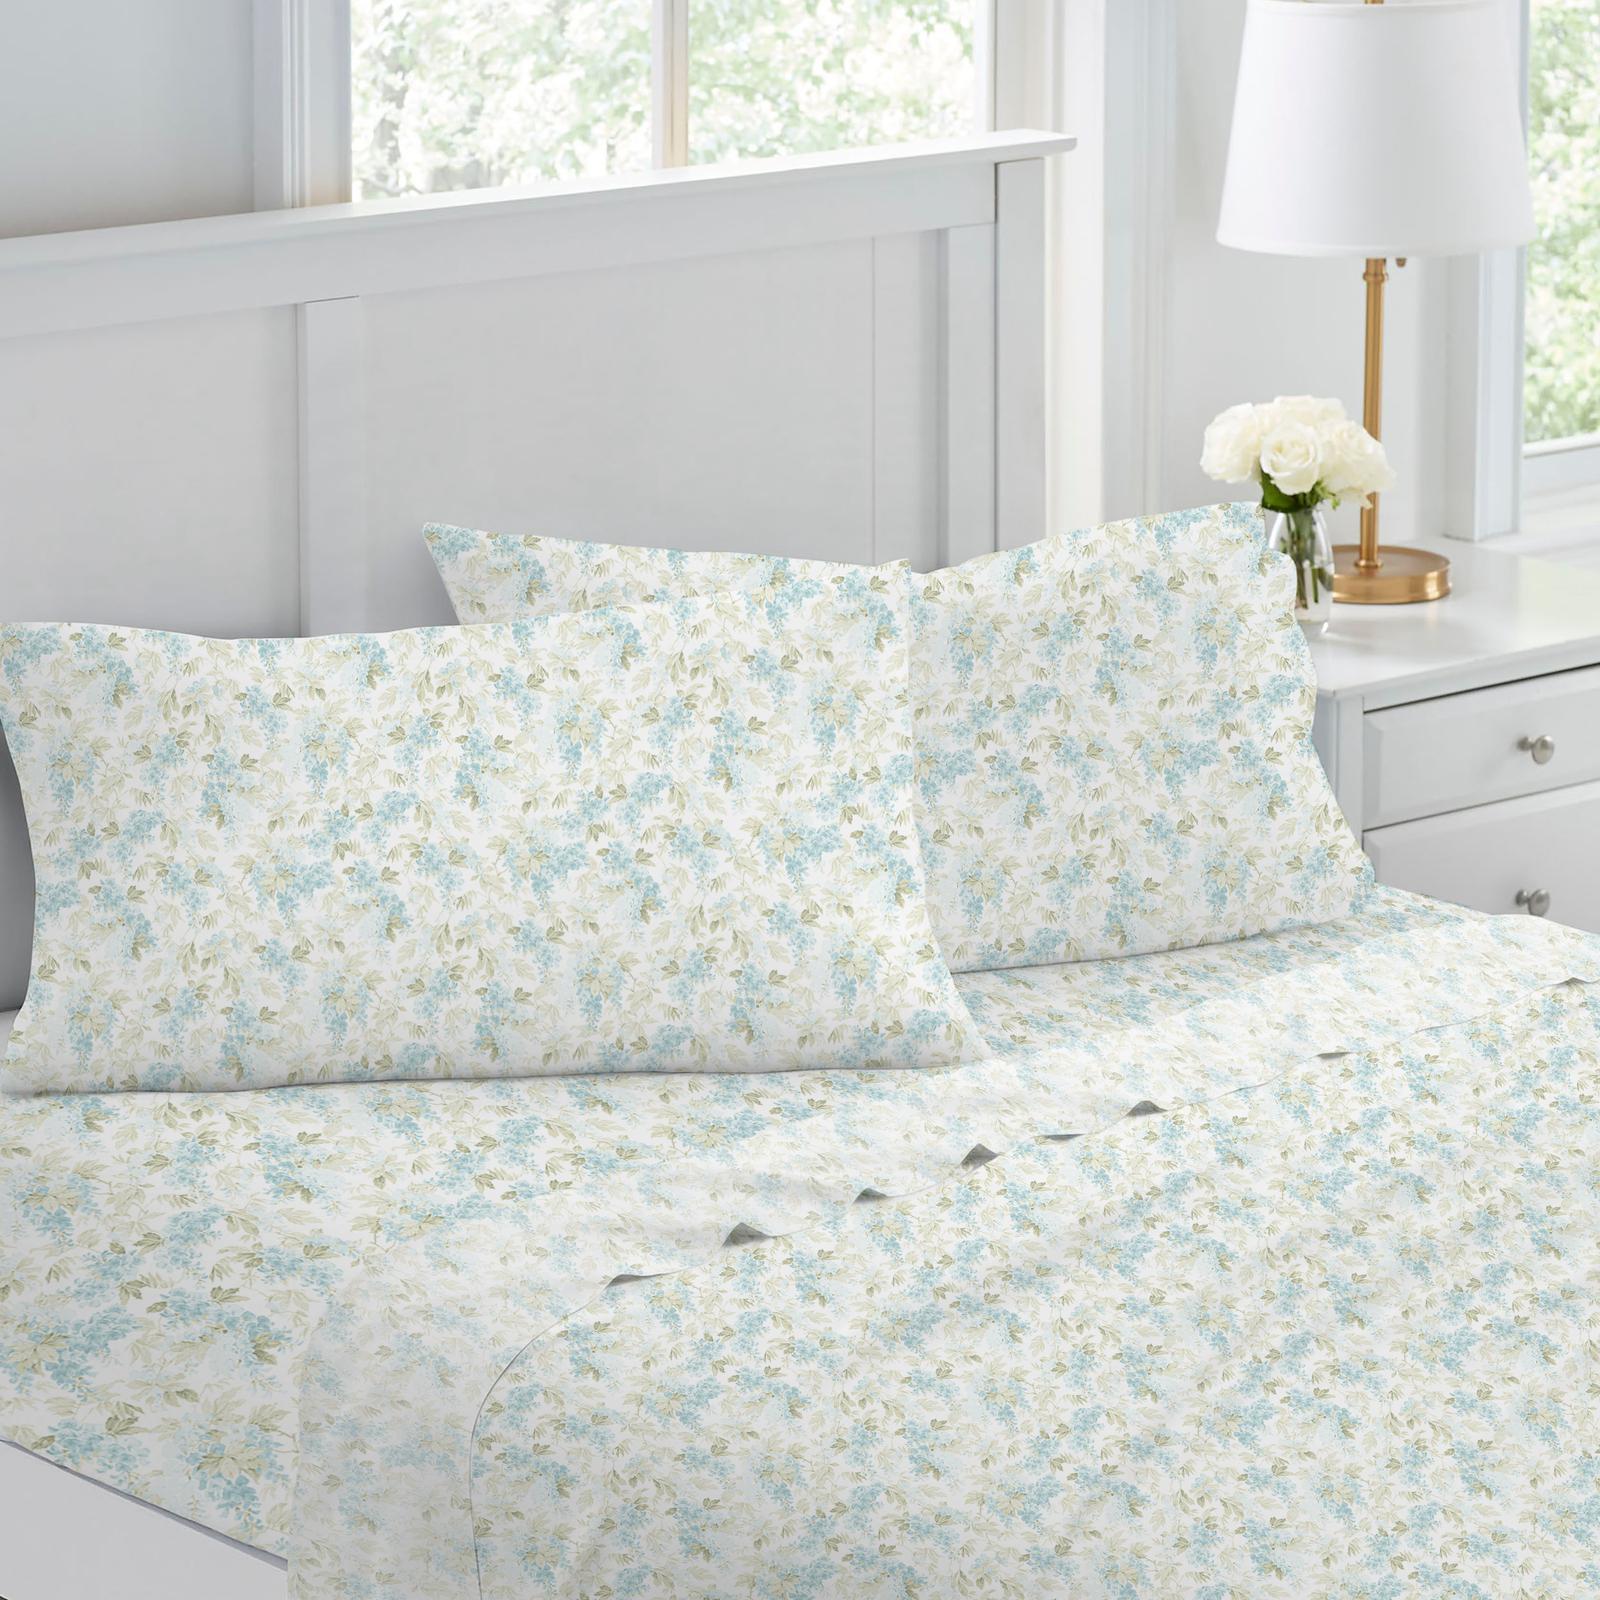 Laura Ashley Rena Printed Queen Bed Sheet Set w/ 2x Pillowcase Home Bedding Teal